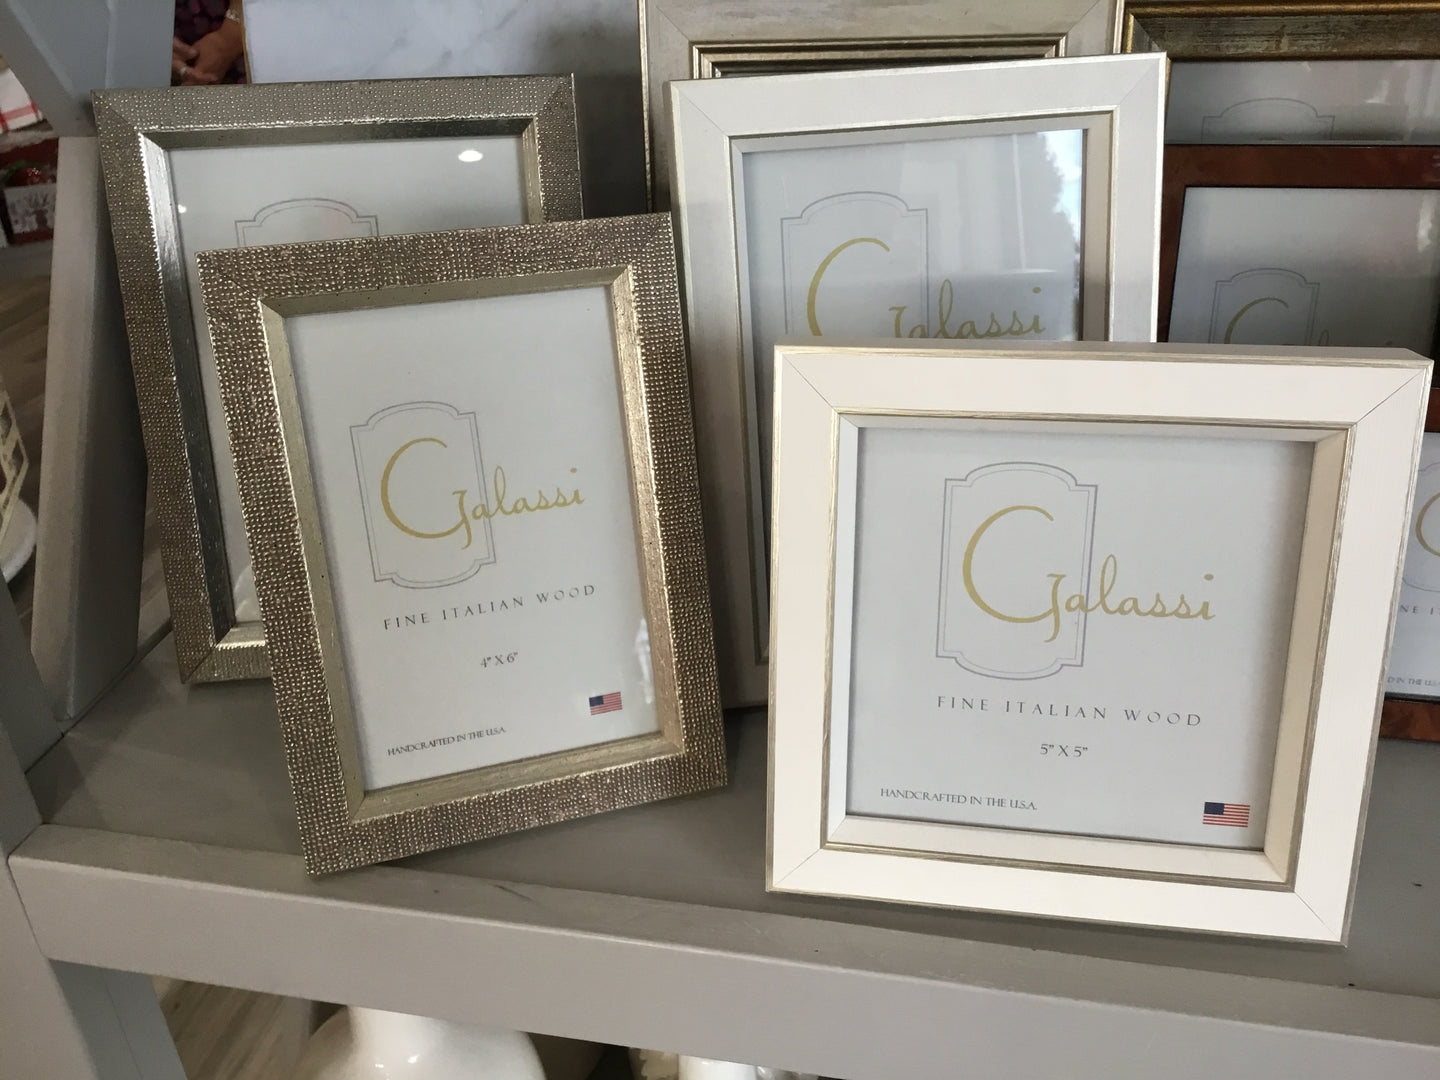 Galassi picture frames